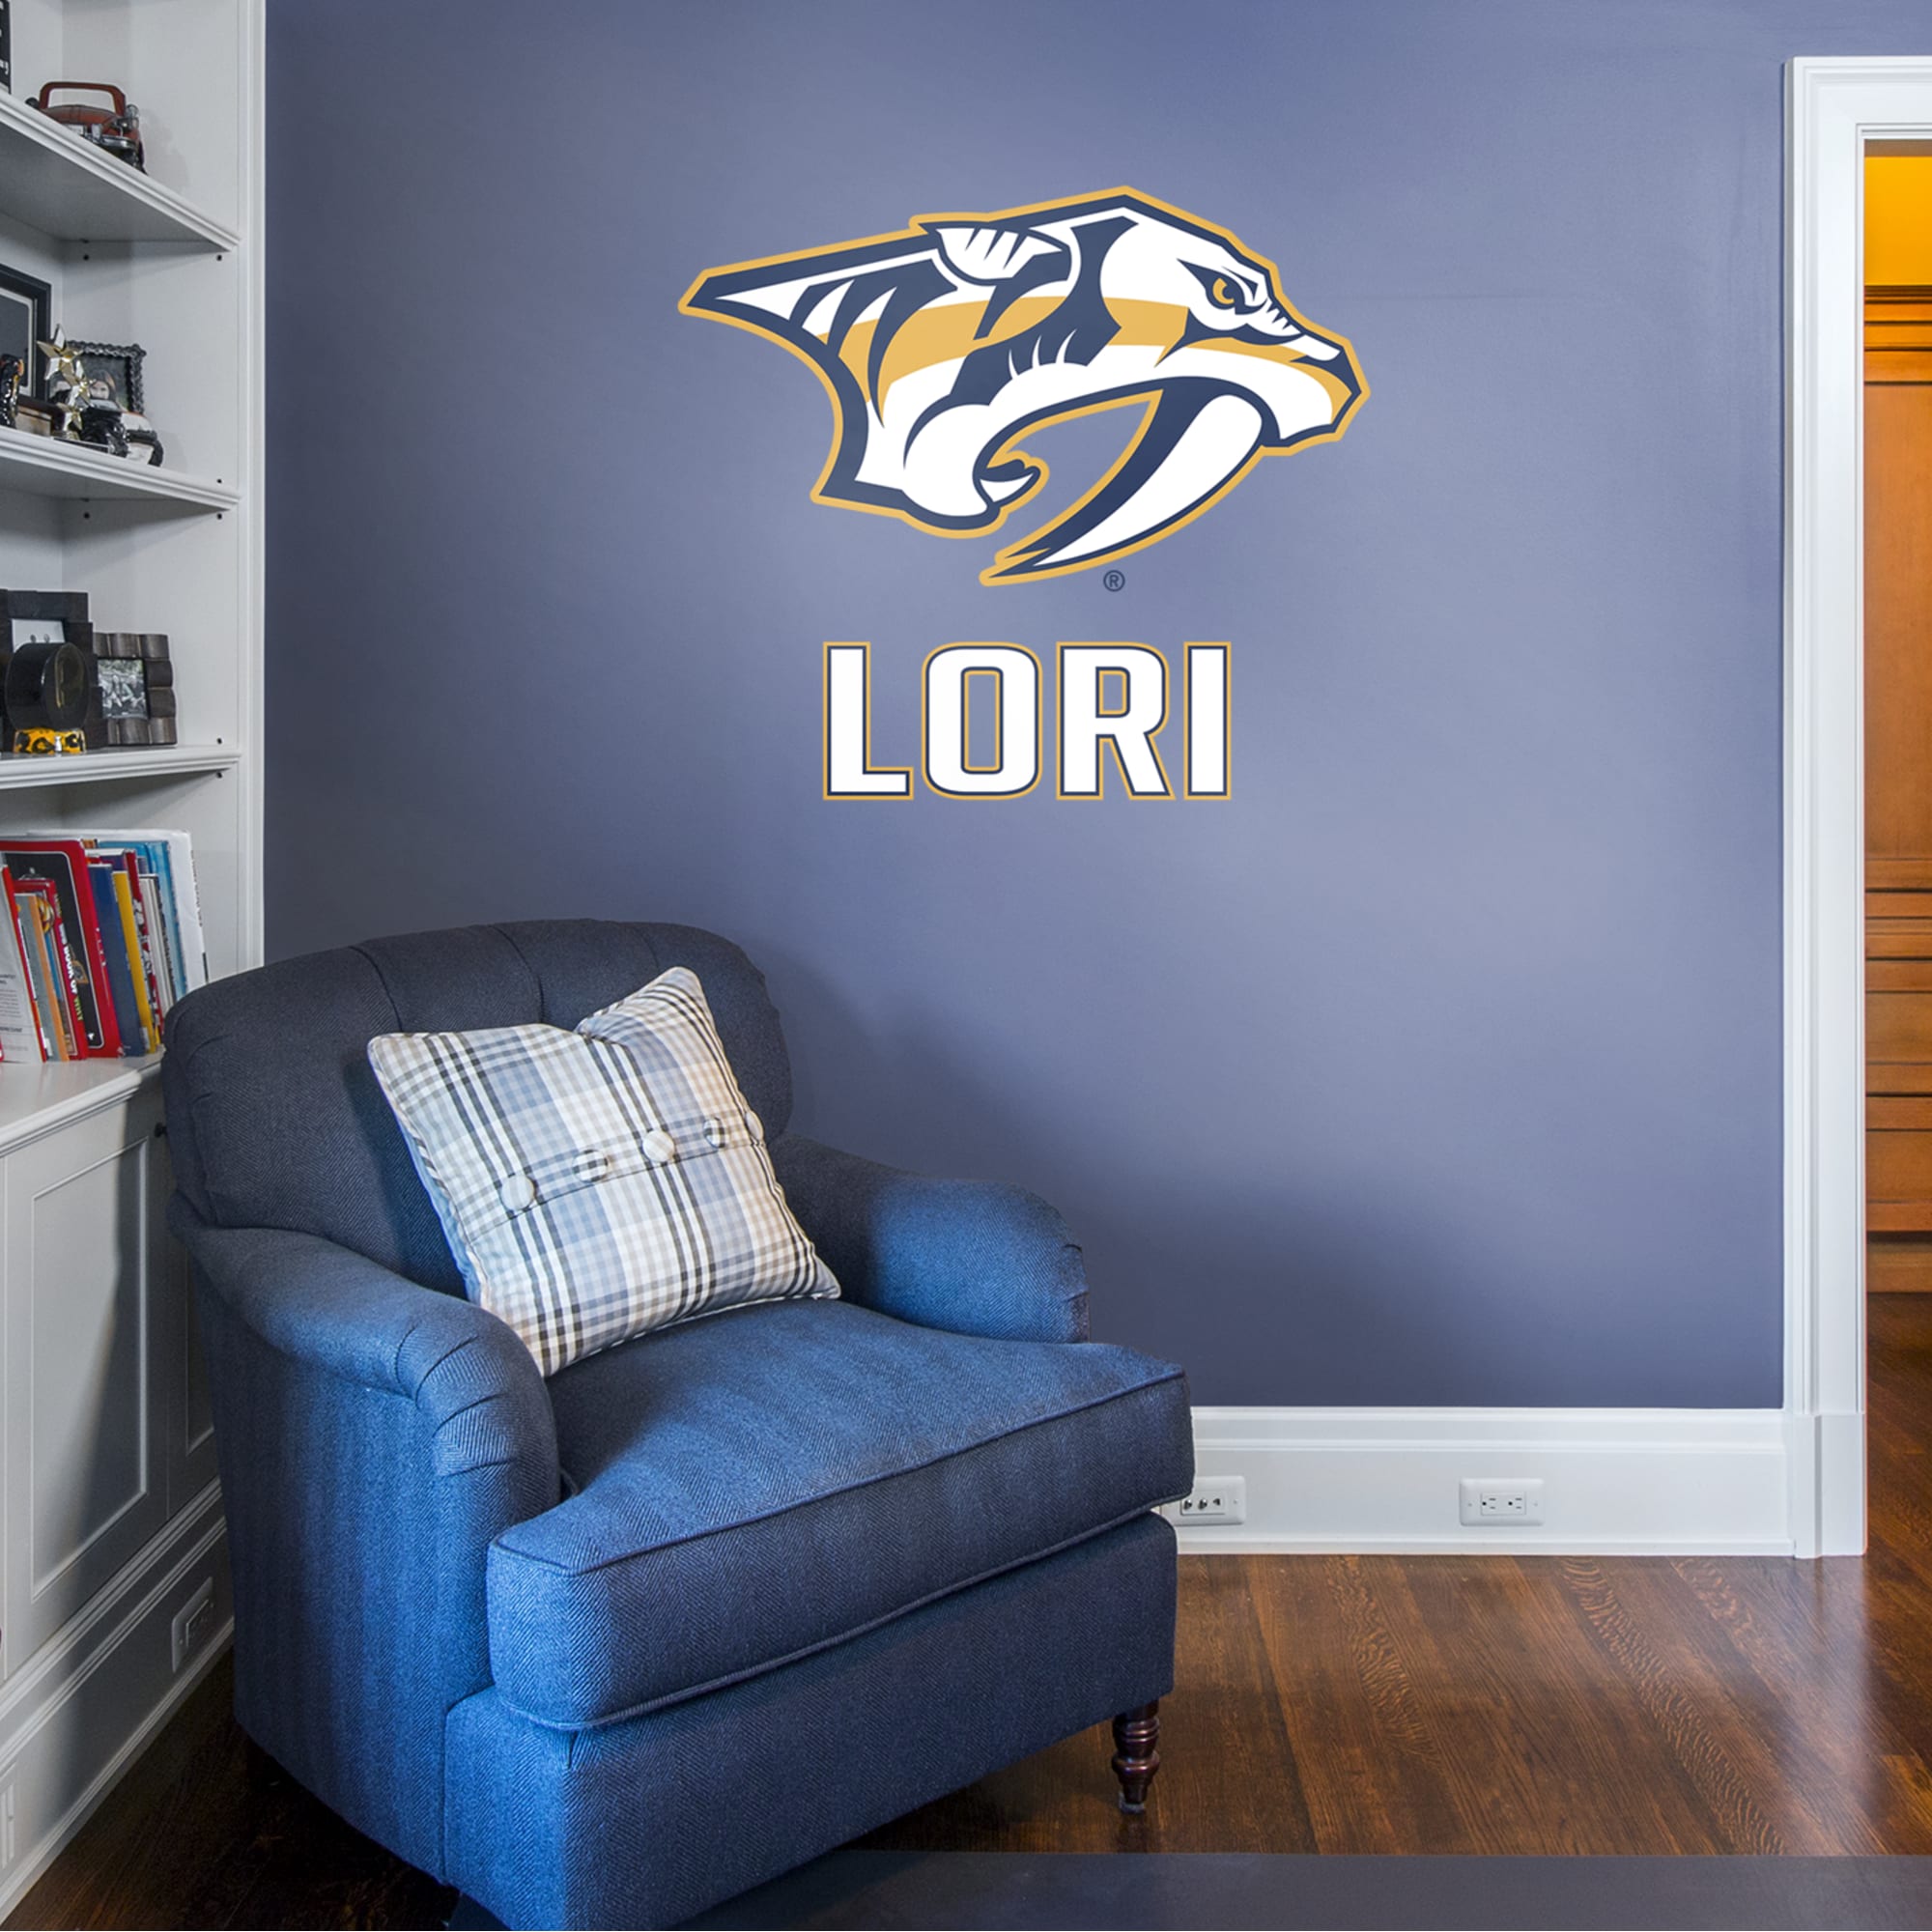 Nashville Predators: Stacked Personalized Name - Officially Licensed NHL Transfer Decal in White (39.5"W x 52"H) by Fathead | Vi